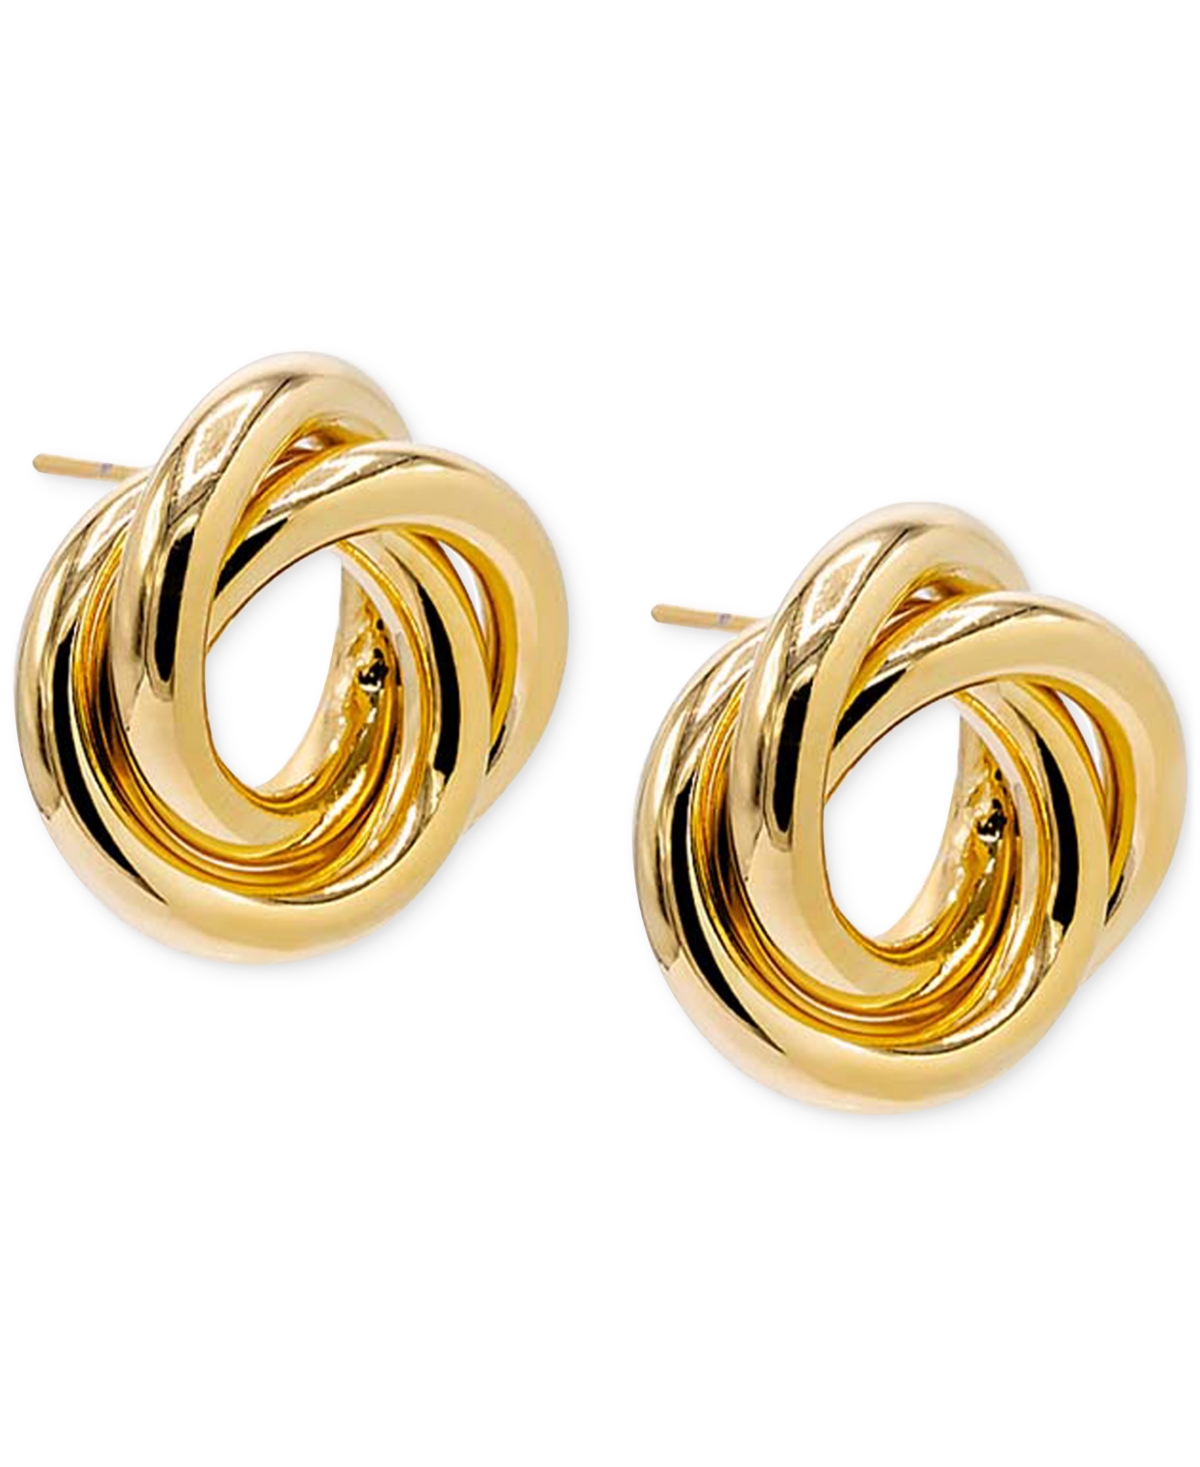 14k Gold-Plated Triple Strand Knot Stud Earrings - Gold